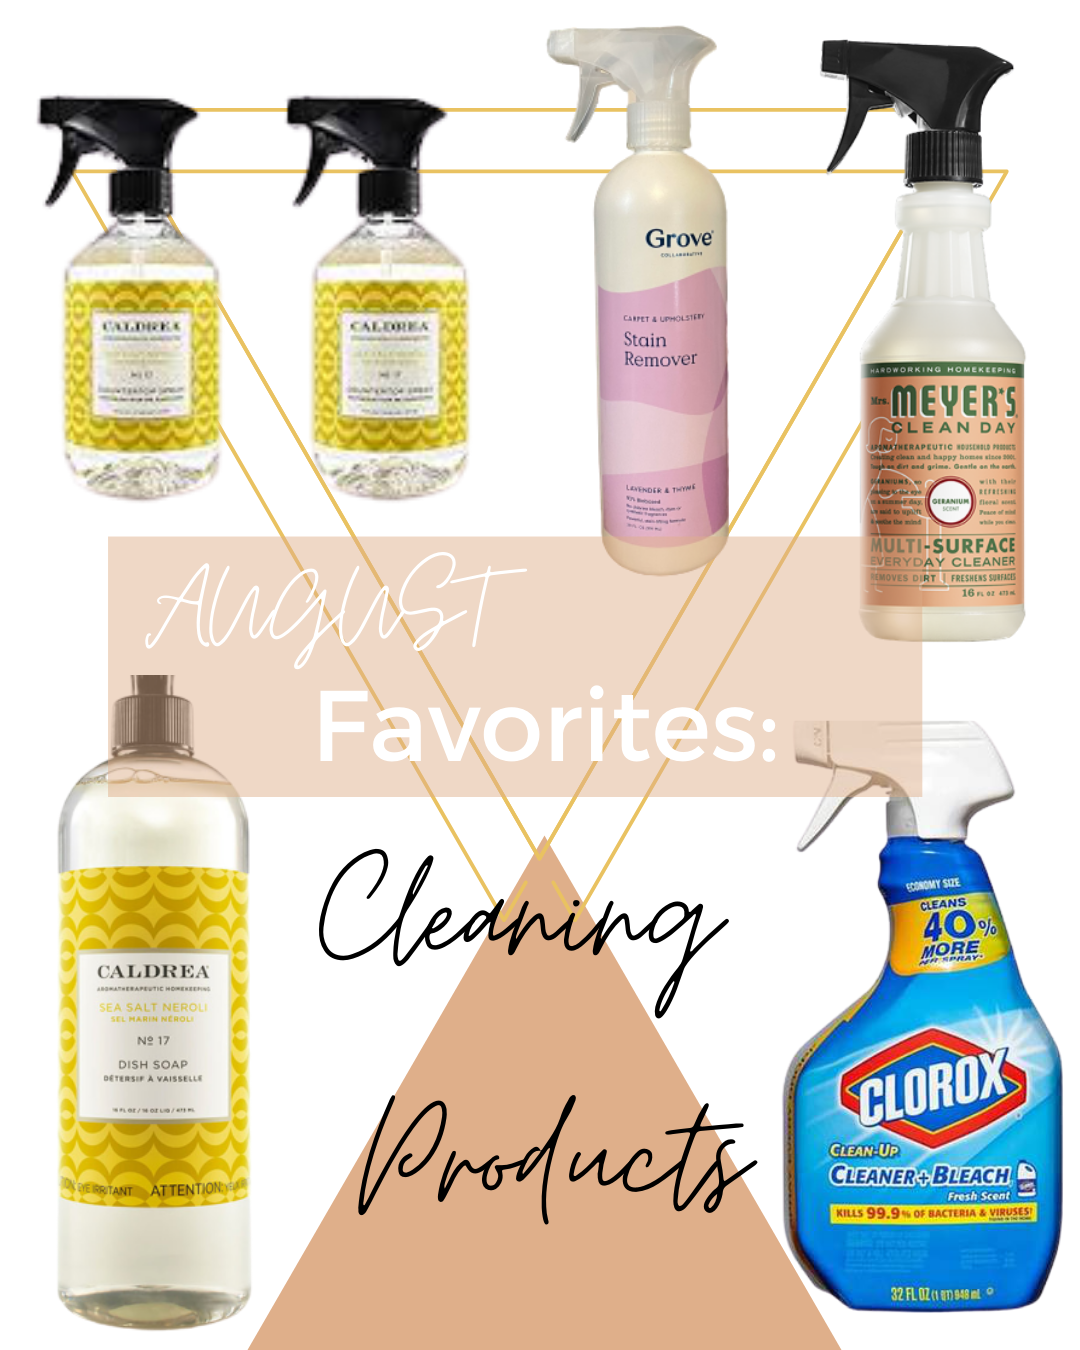 Top 5 August Favorites: Cleaning Products